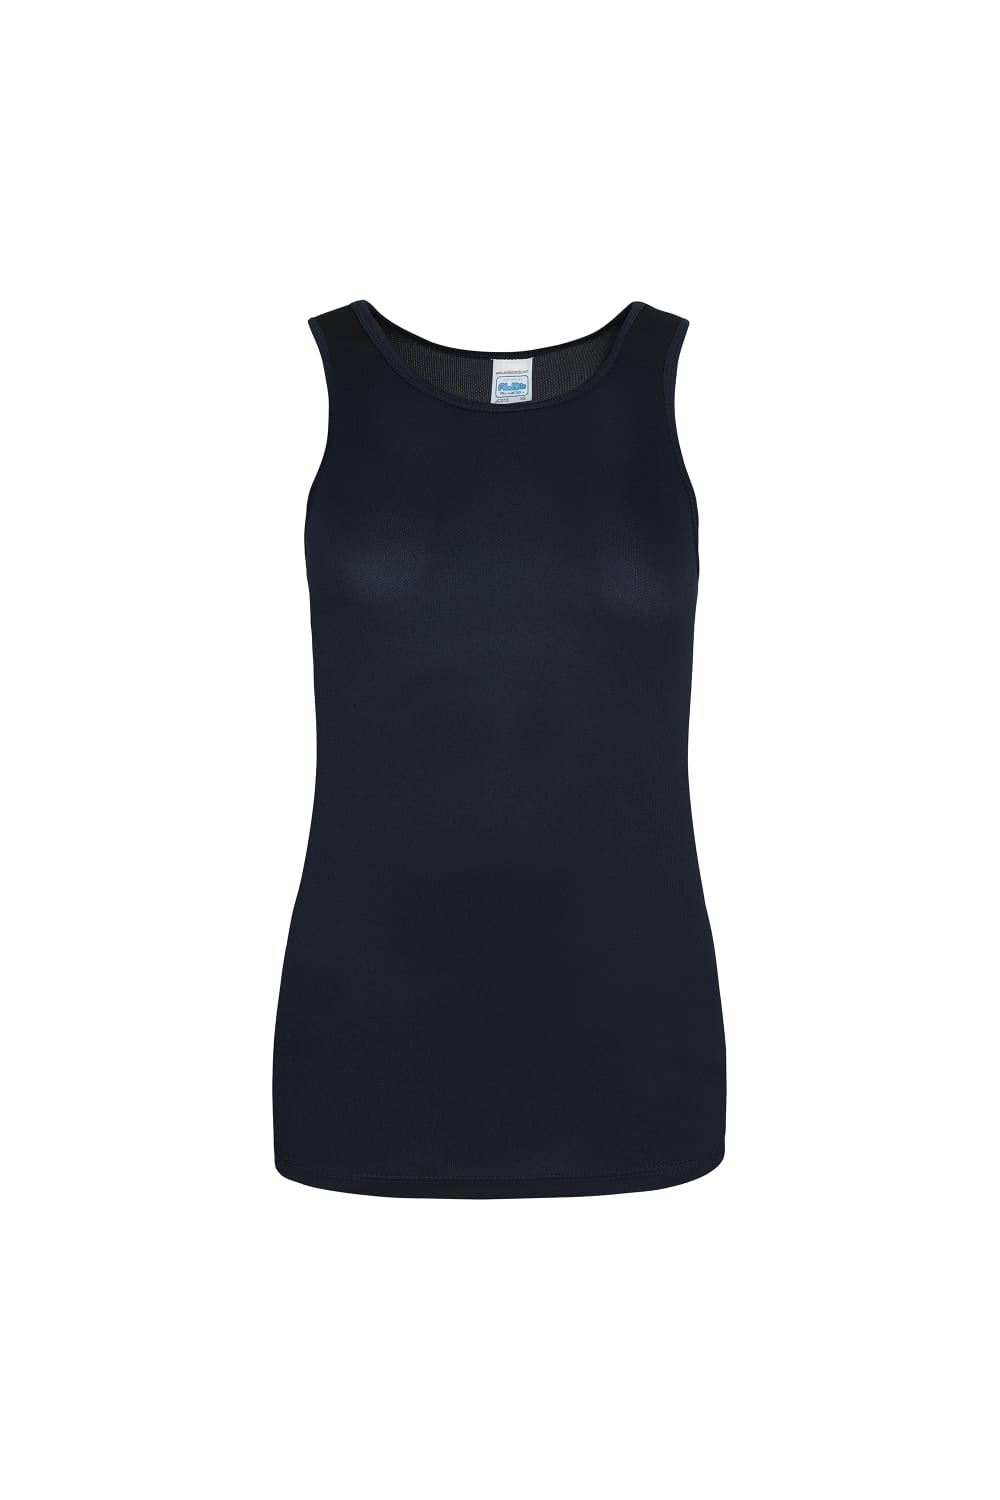 Just Cool Girlie Fit Sports Ladies Vest / Tank Top (French Navy)